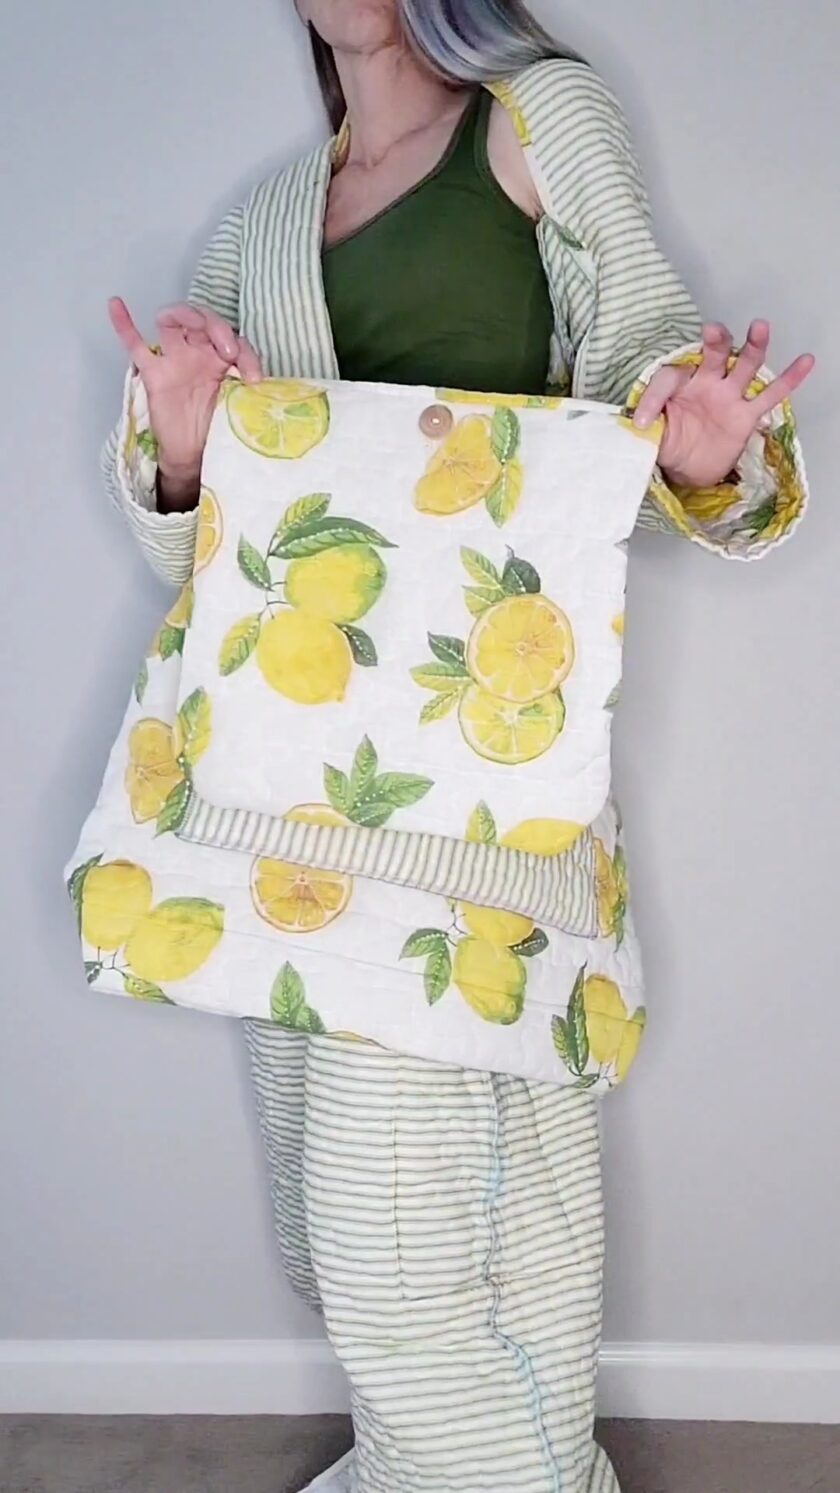 A woman holding a bag with lemons on it.